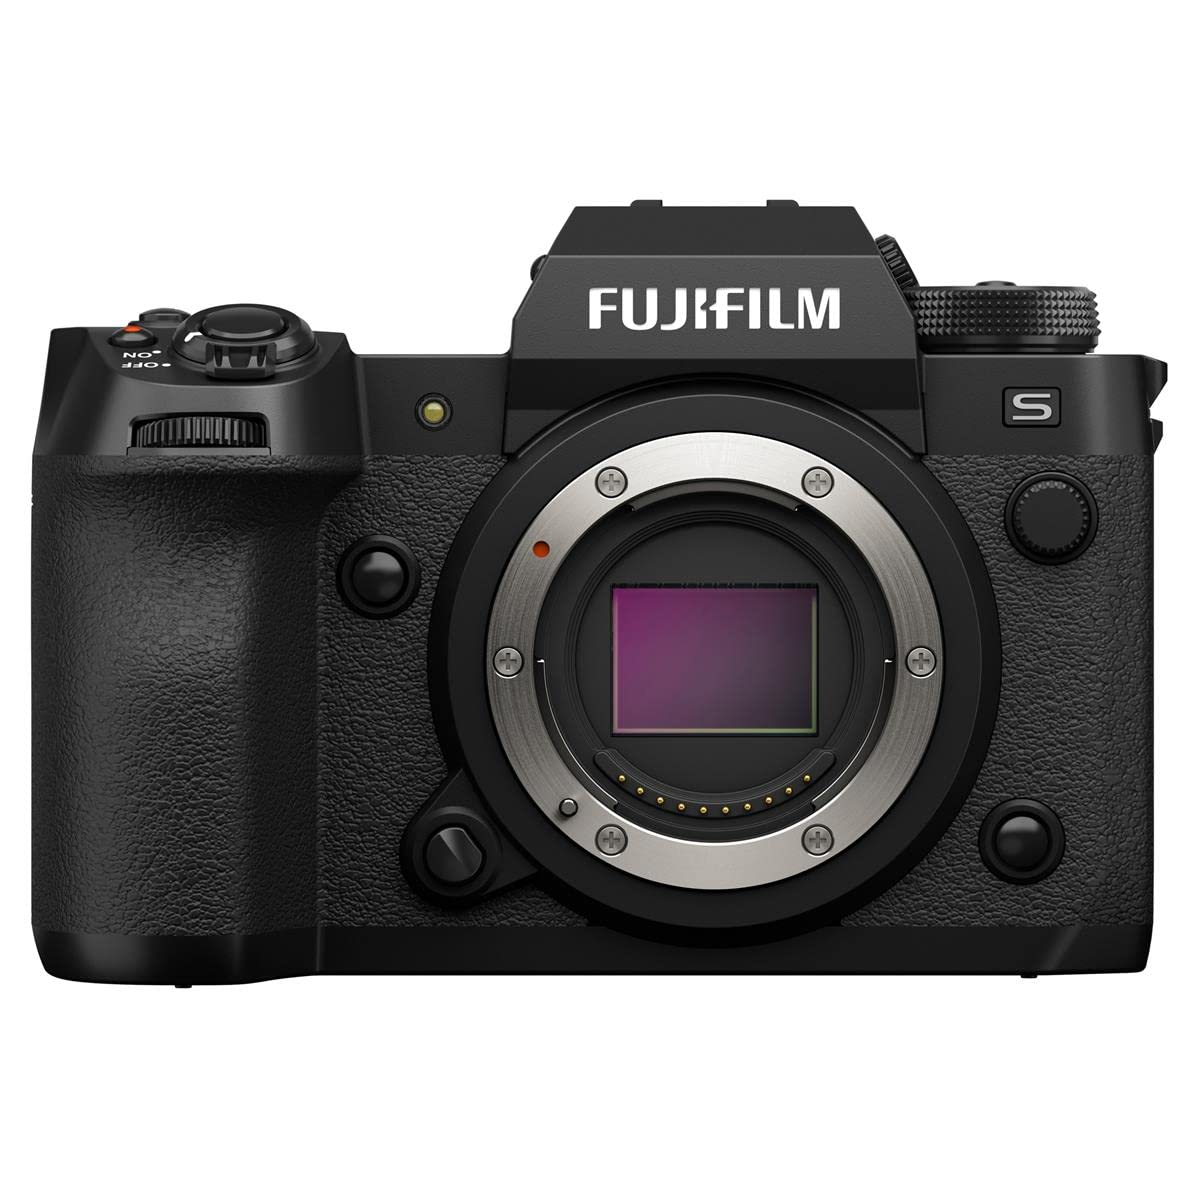 Fujifilm X-H2S Mirrorless Digital Camera Body with XF 16-55mm F2.8 R LM WR (Weather Resistant) Lens